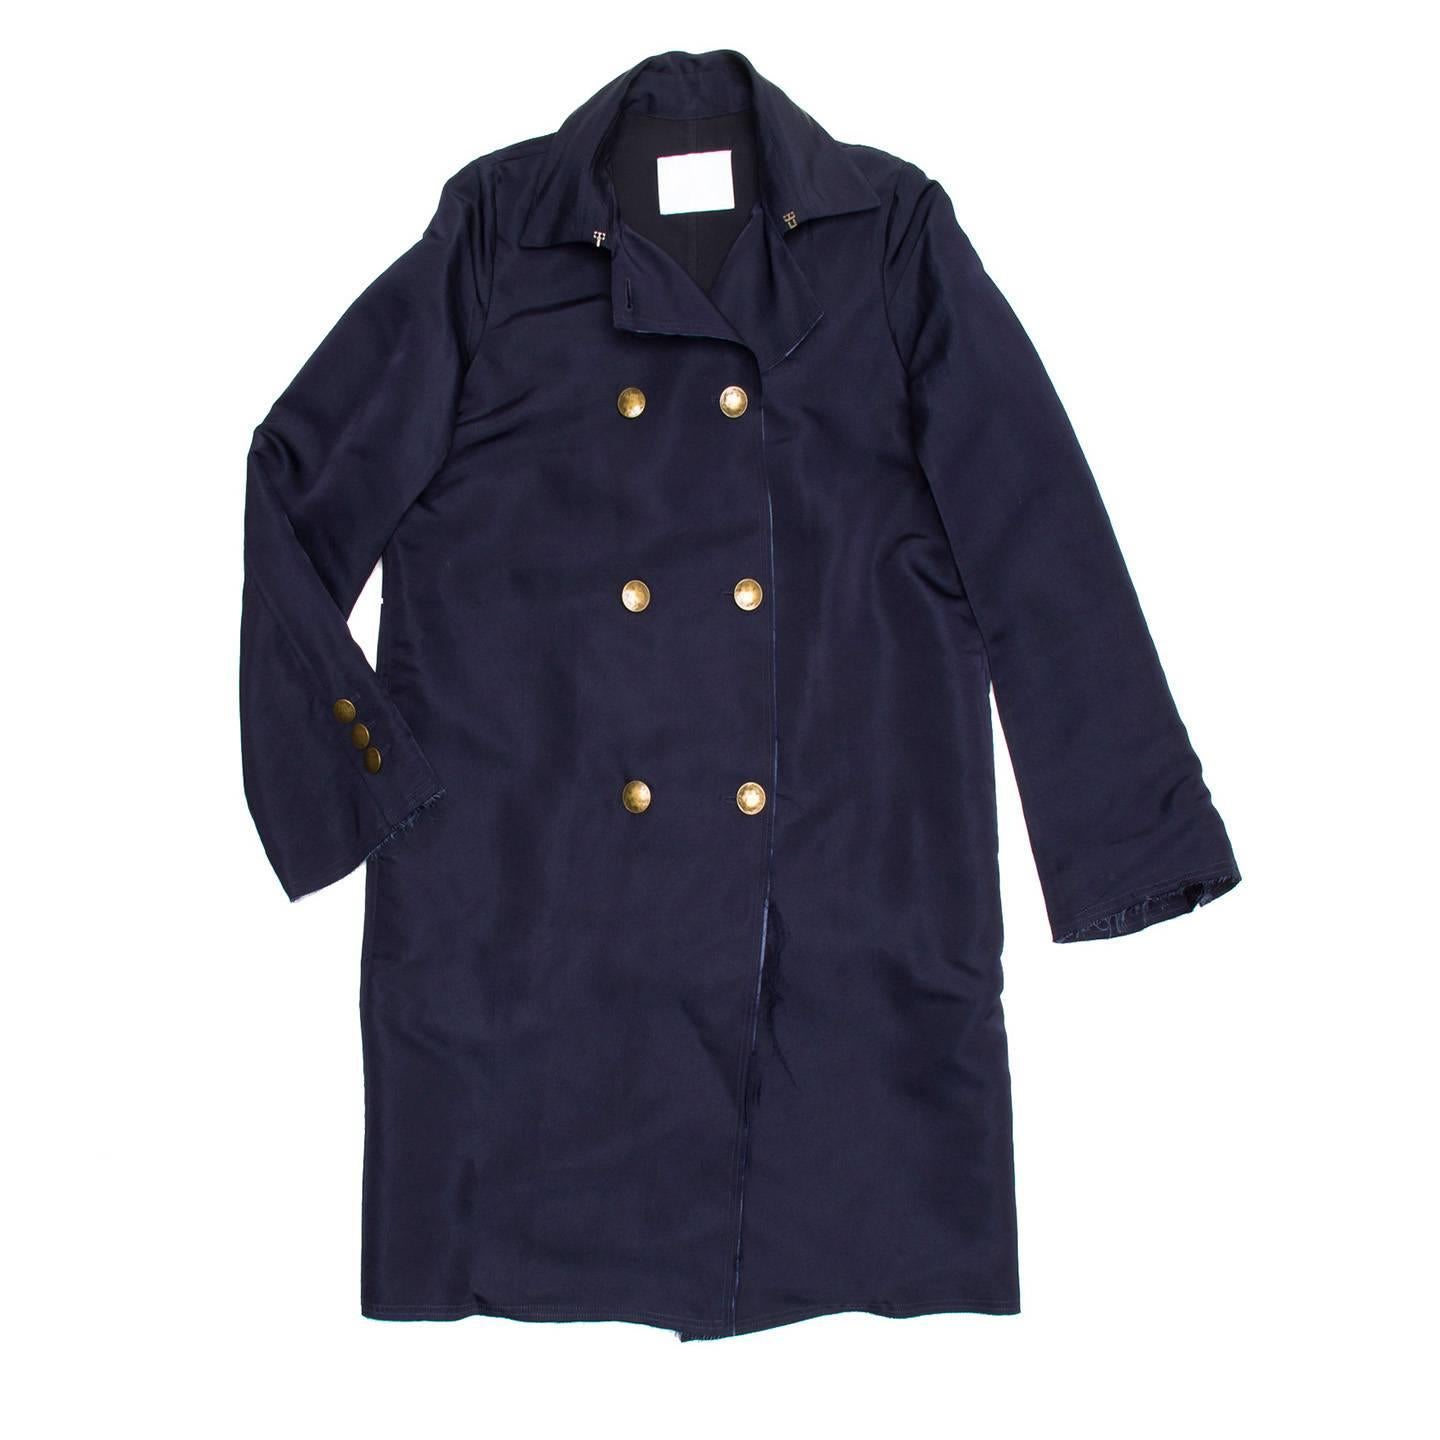 Lanvin 2008. Silk navy double breasted overcoat with brass buttons and raw finish trim on cuffs and hemline.

Size  42 French sizing

Condition  Excellent: worn a few times